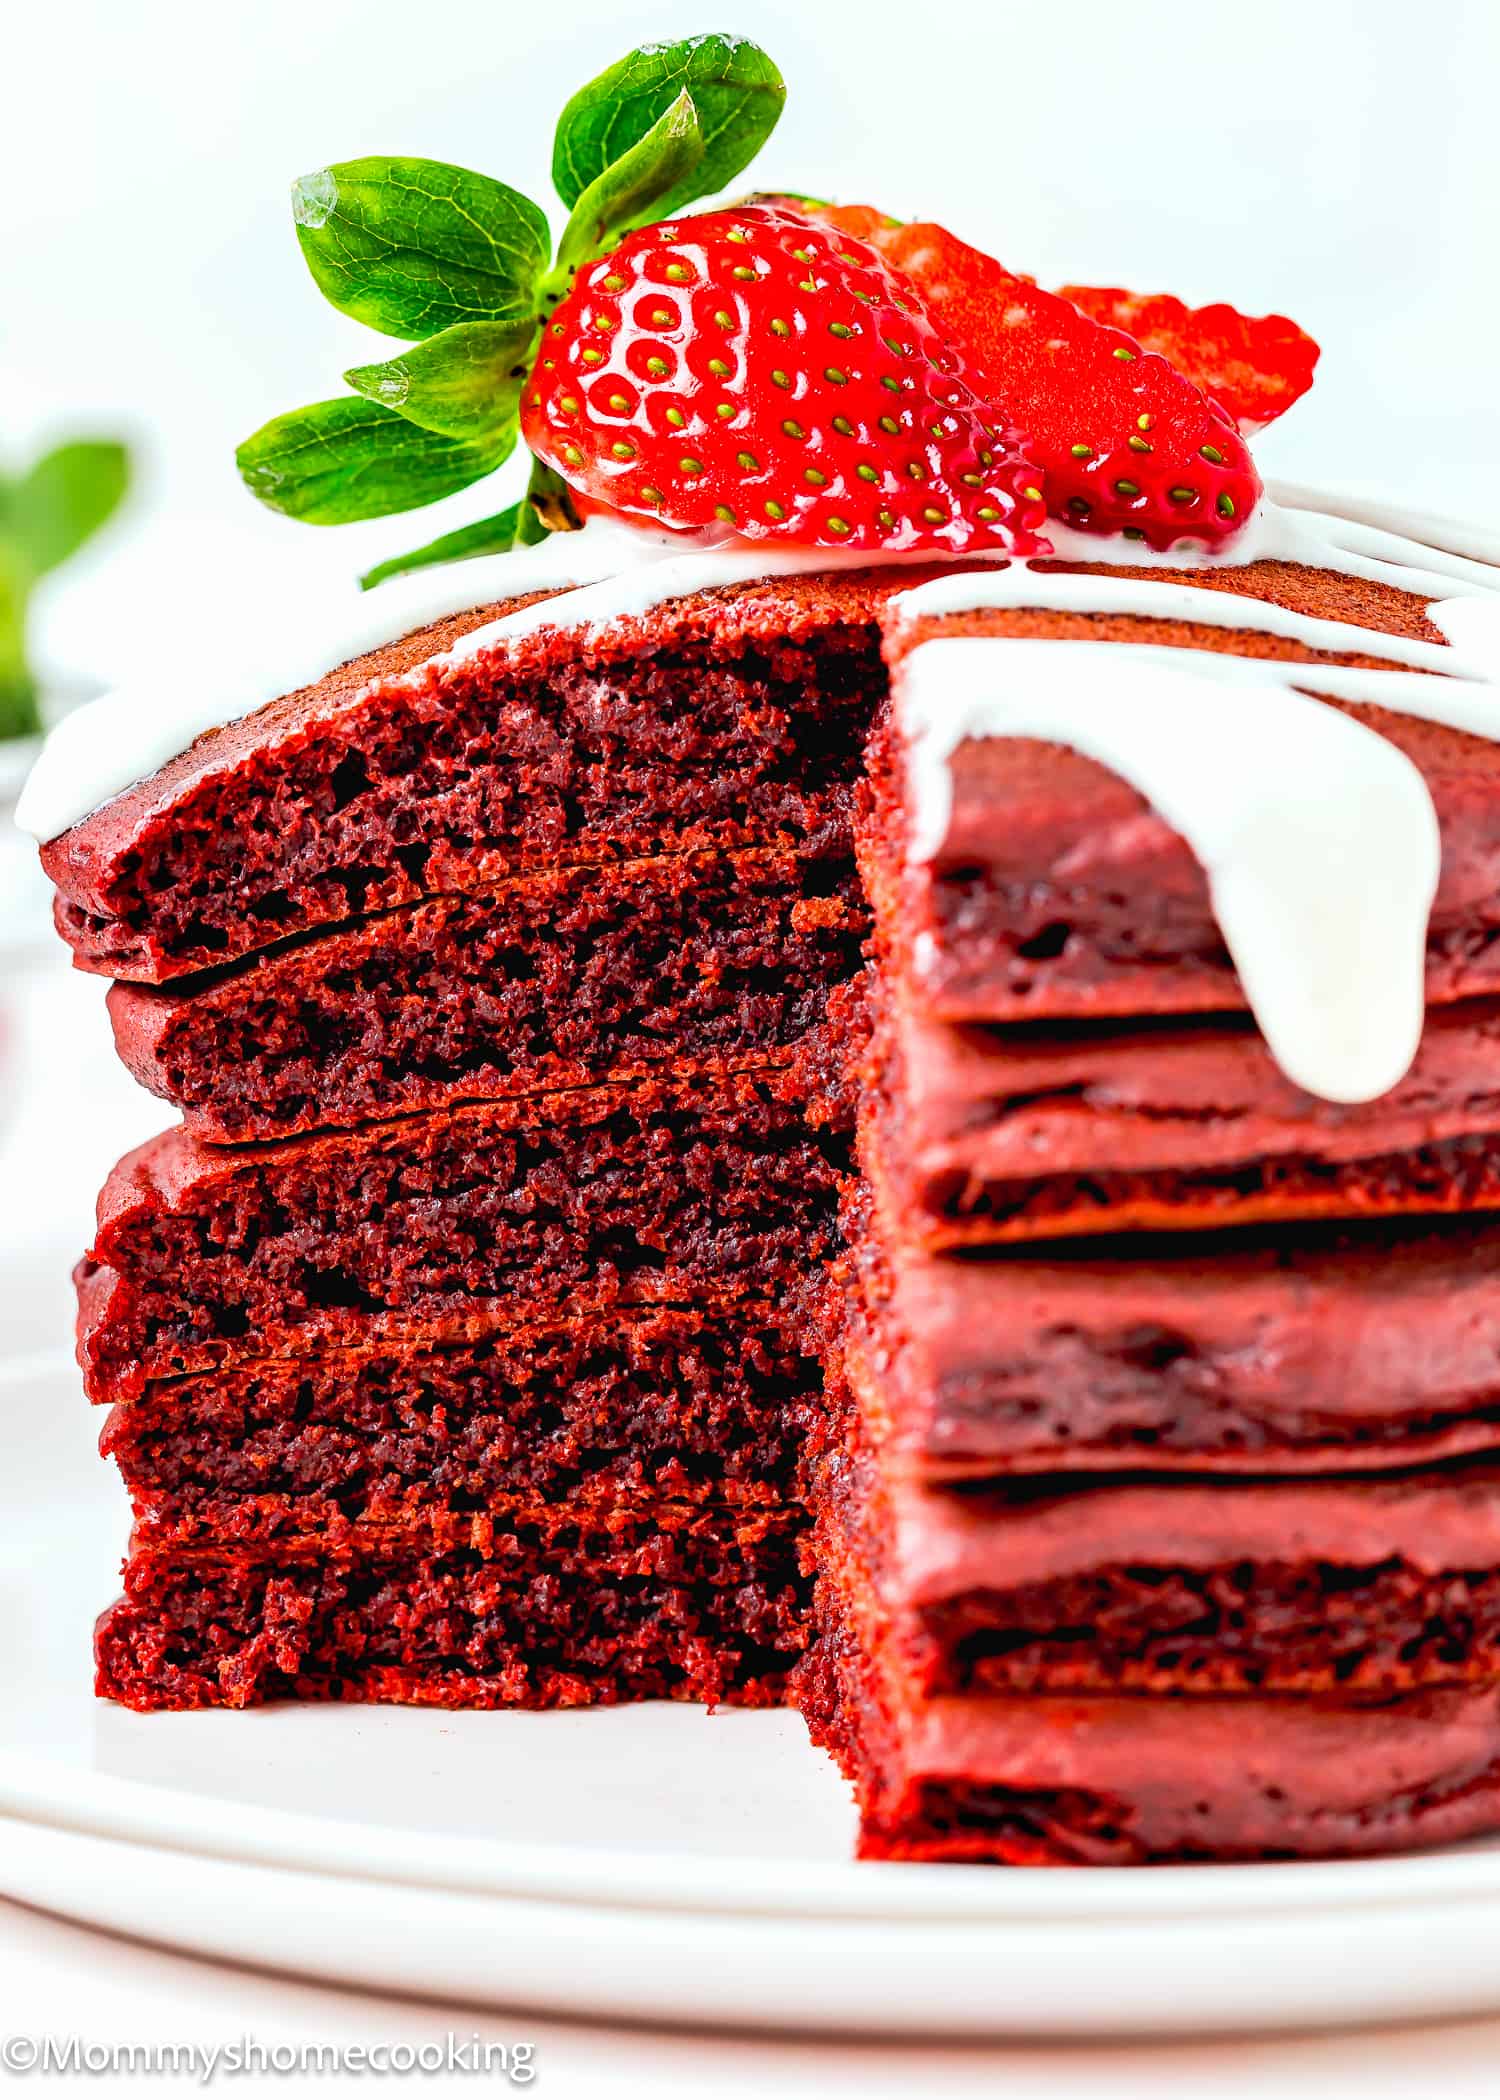 cut five egg-free red velvet pancakes stack showing their fluffy inside texture.